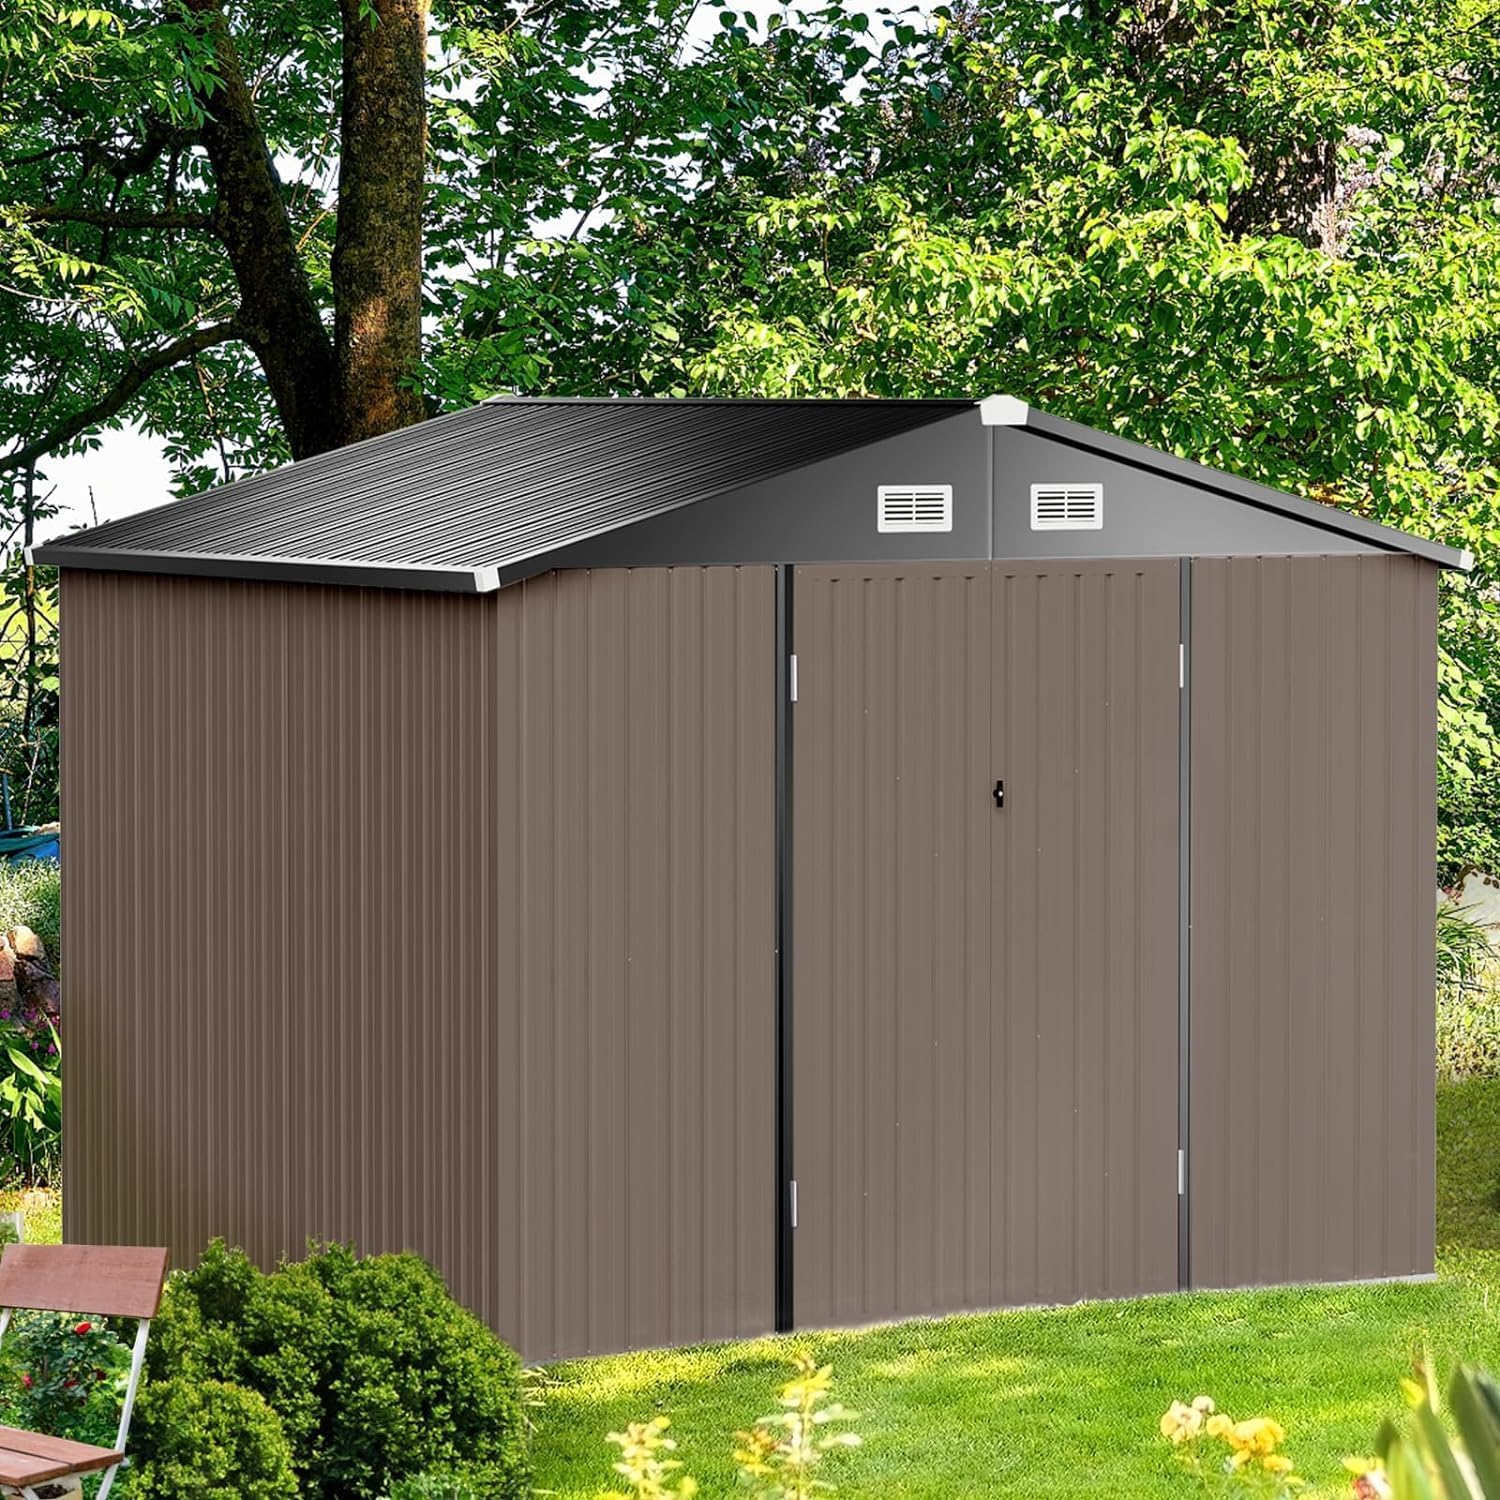 10' x 8' Utility Metal Shed with/without Base, Galvanized Steel Tool Storage Shed, with Air Vent and Lockable Door, Brown